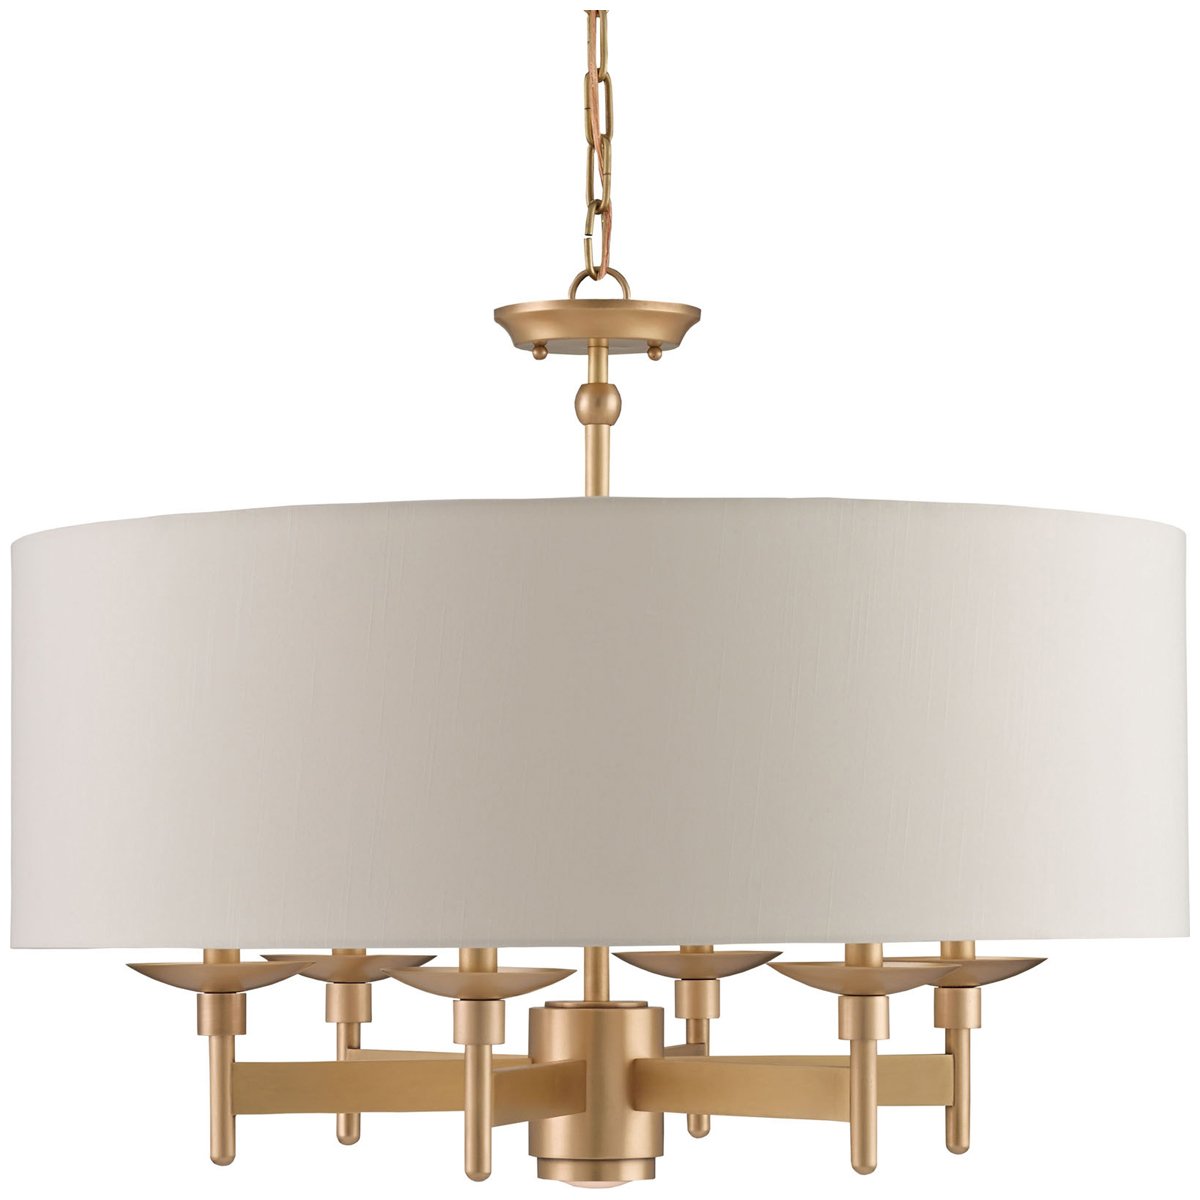 Currey and Company Bering Brass Chandelier